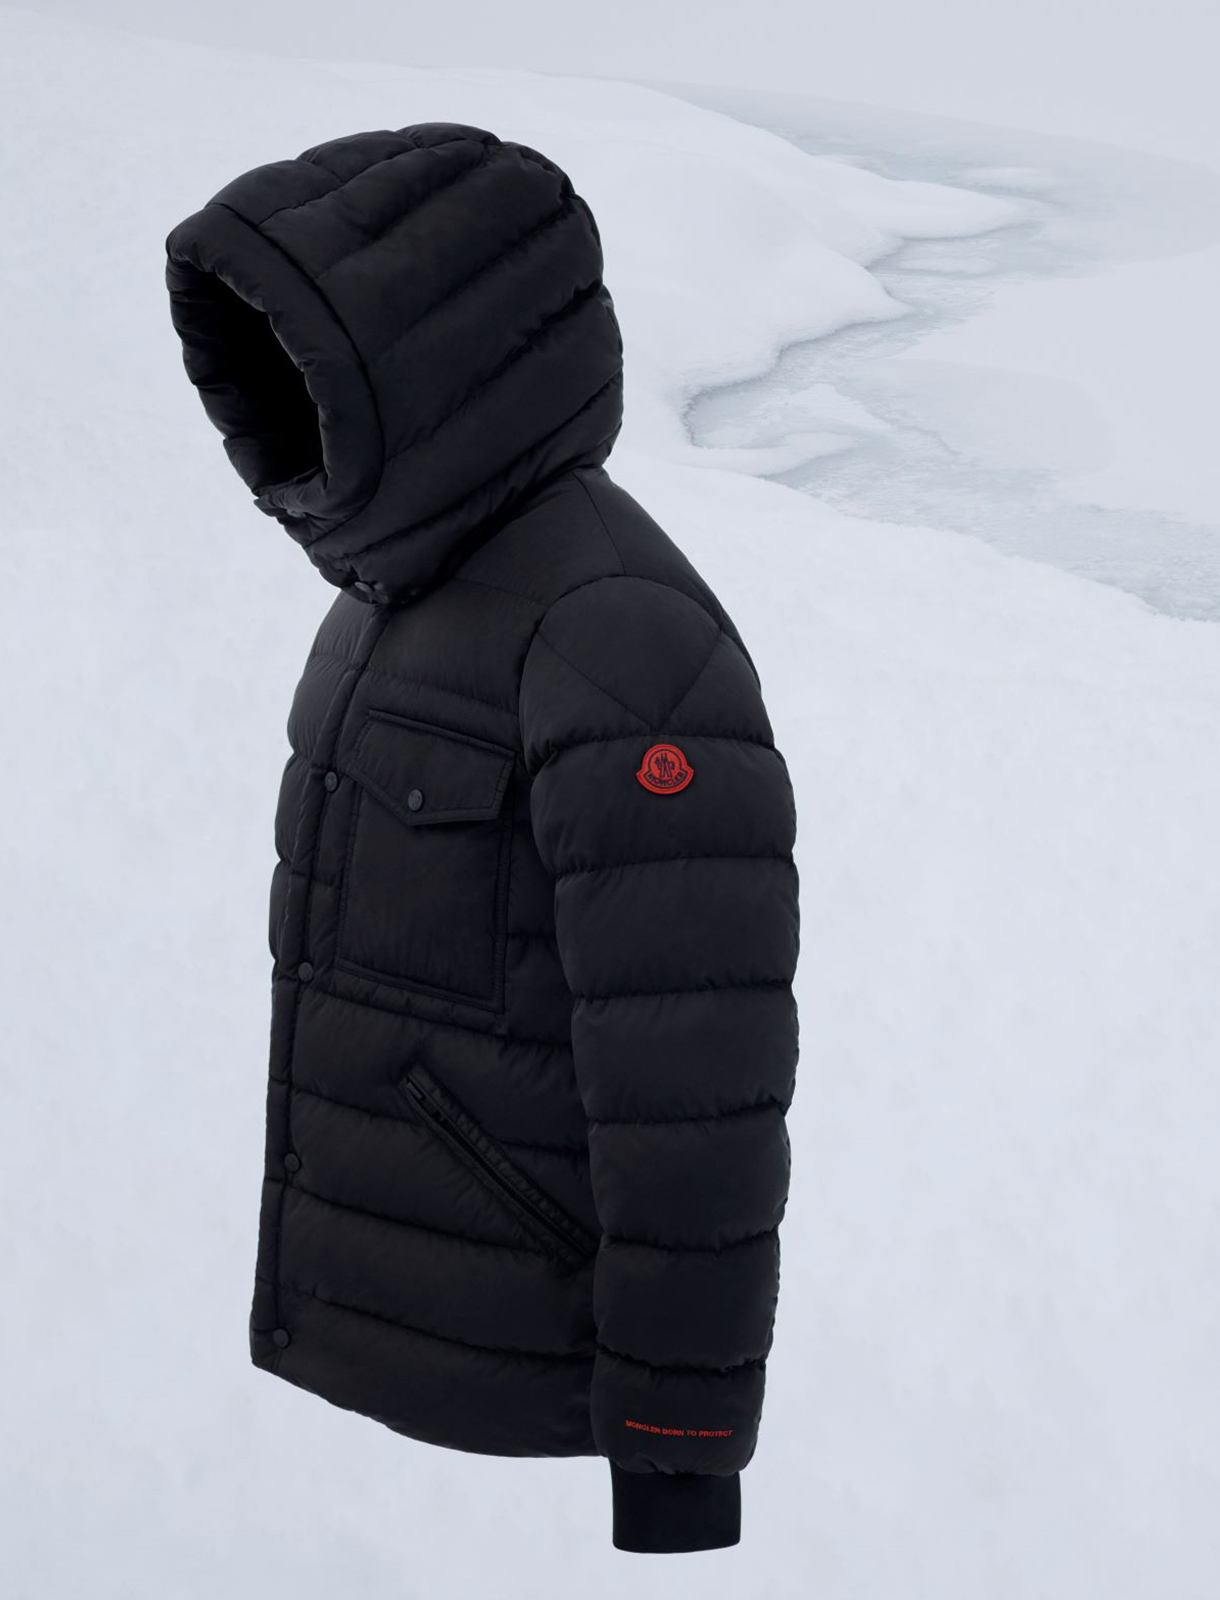 MONCLER BORN TO PROTECT (3)